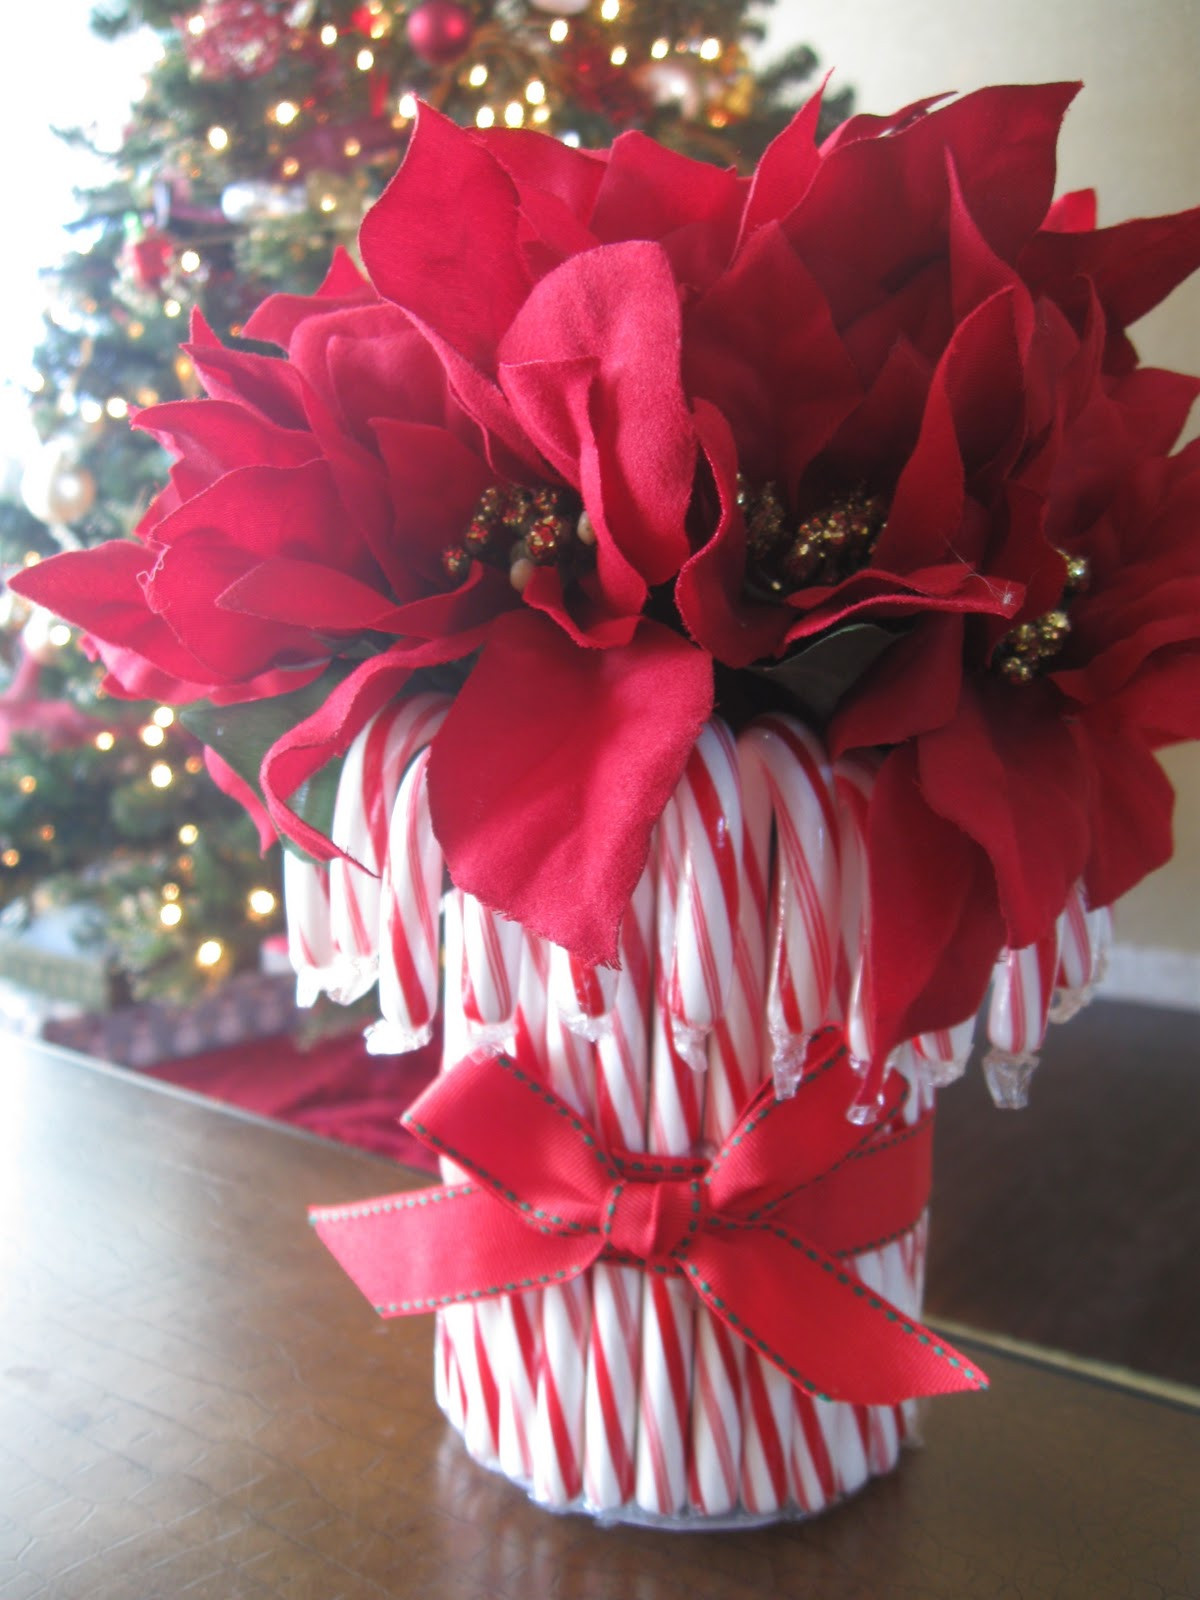 Candy Cane Ideas For Christmas
 DIY Candy Cane Vase